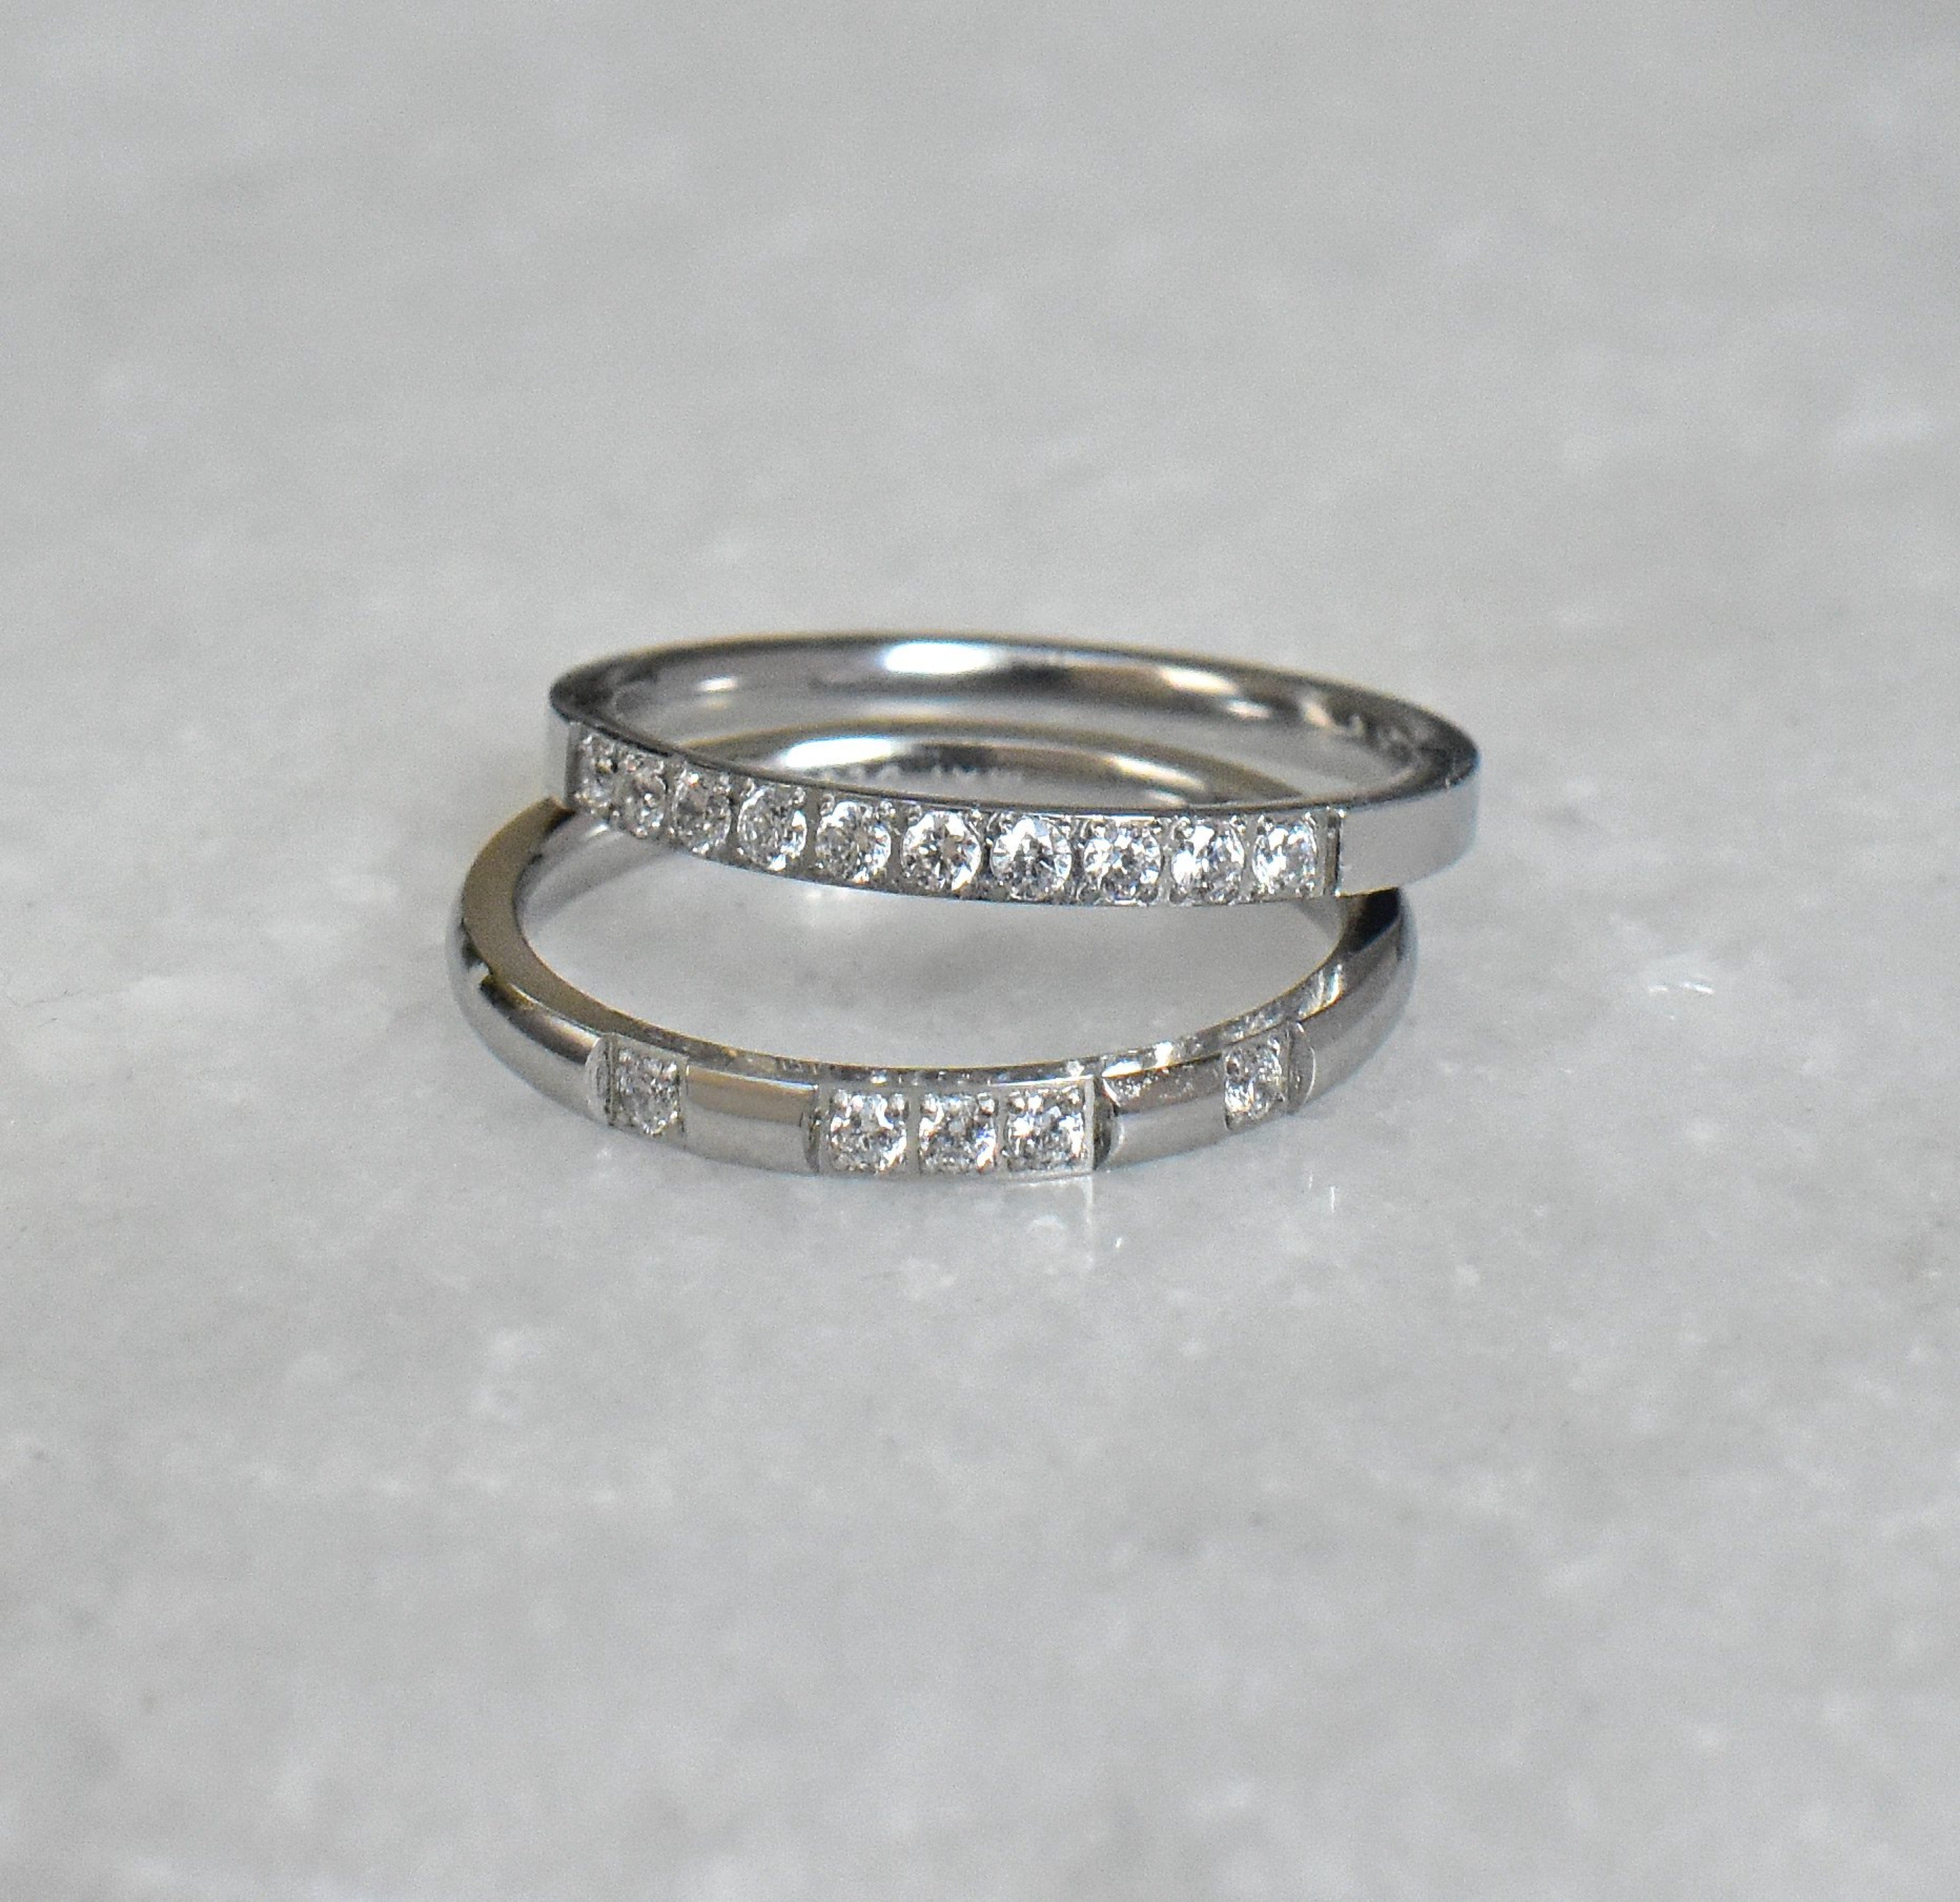 Veda thin silver pave ring band. paired with Stella hand eternity ring band. Silver waterproof jewelry